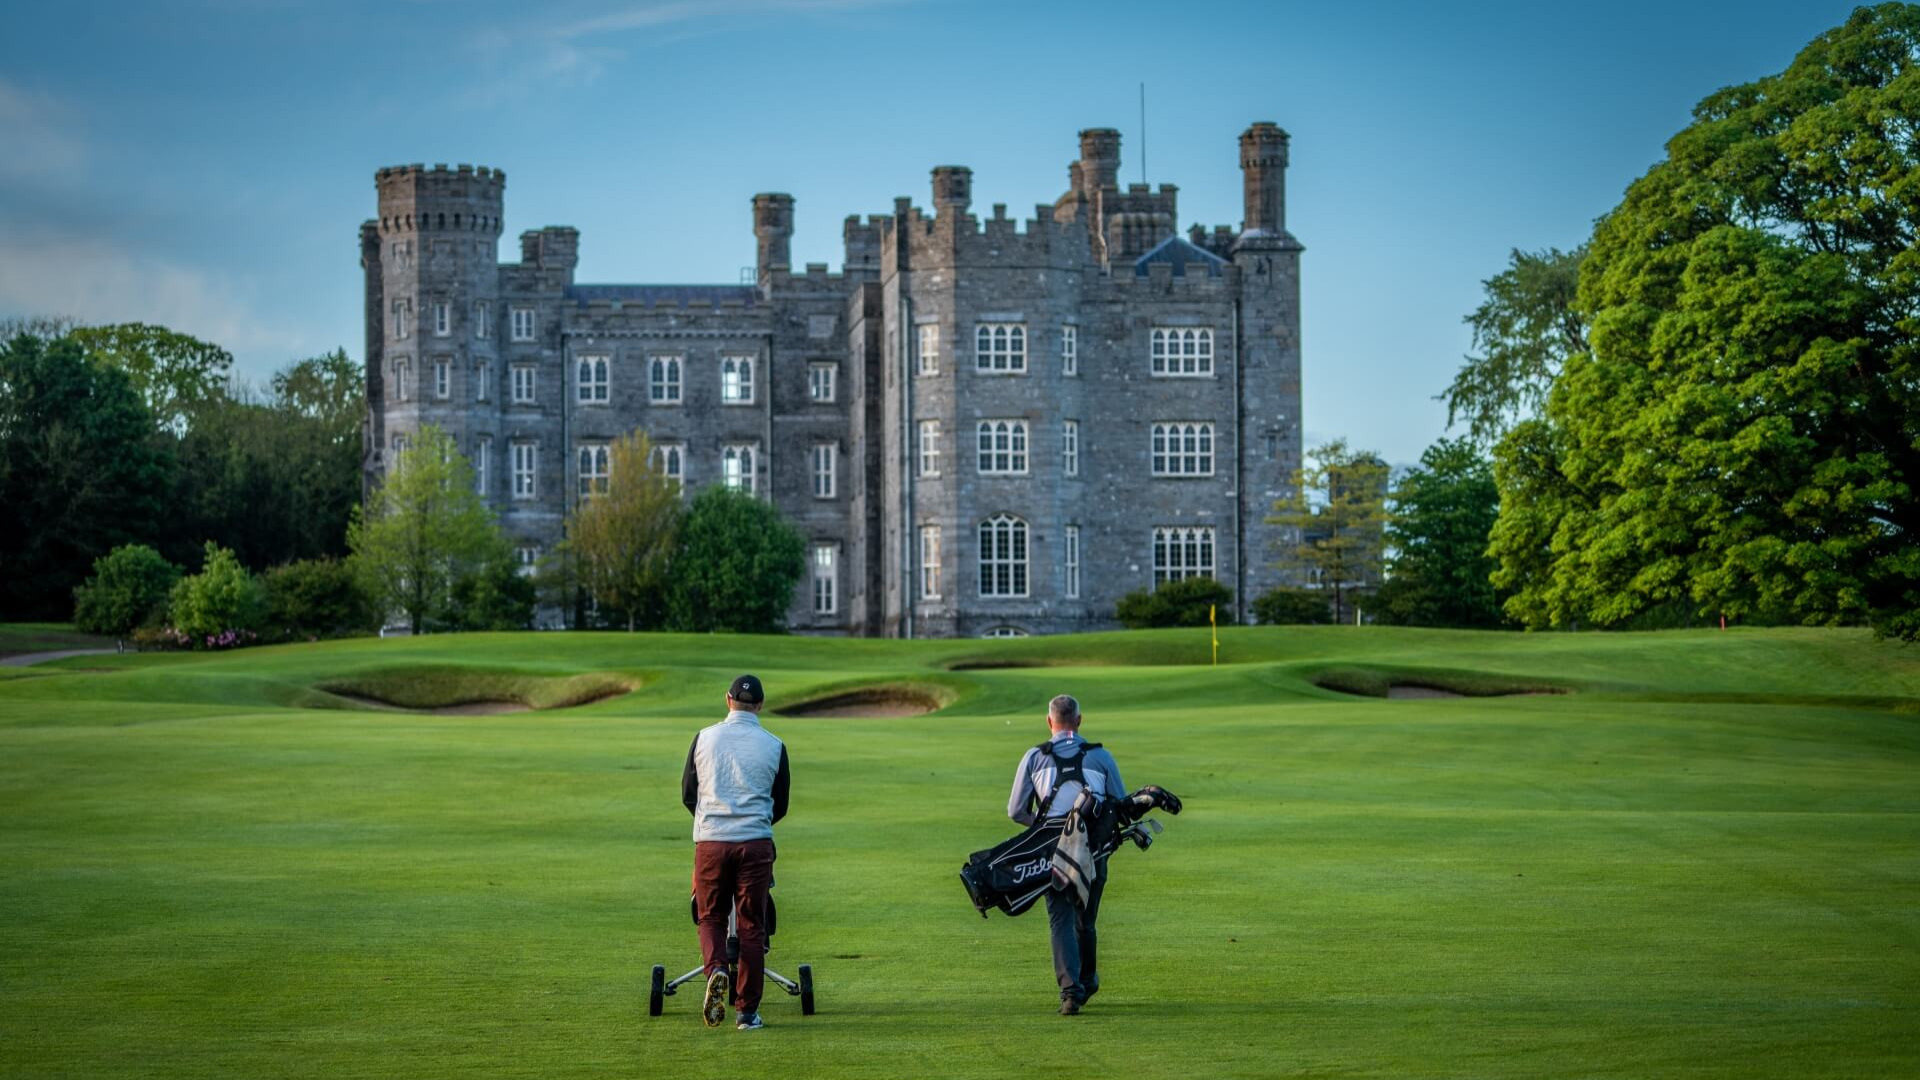 Jack nicklaus golf course at killeen castle 